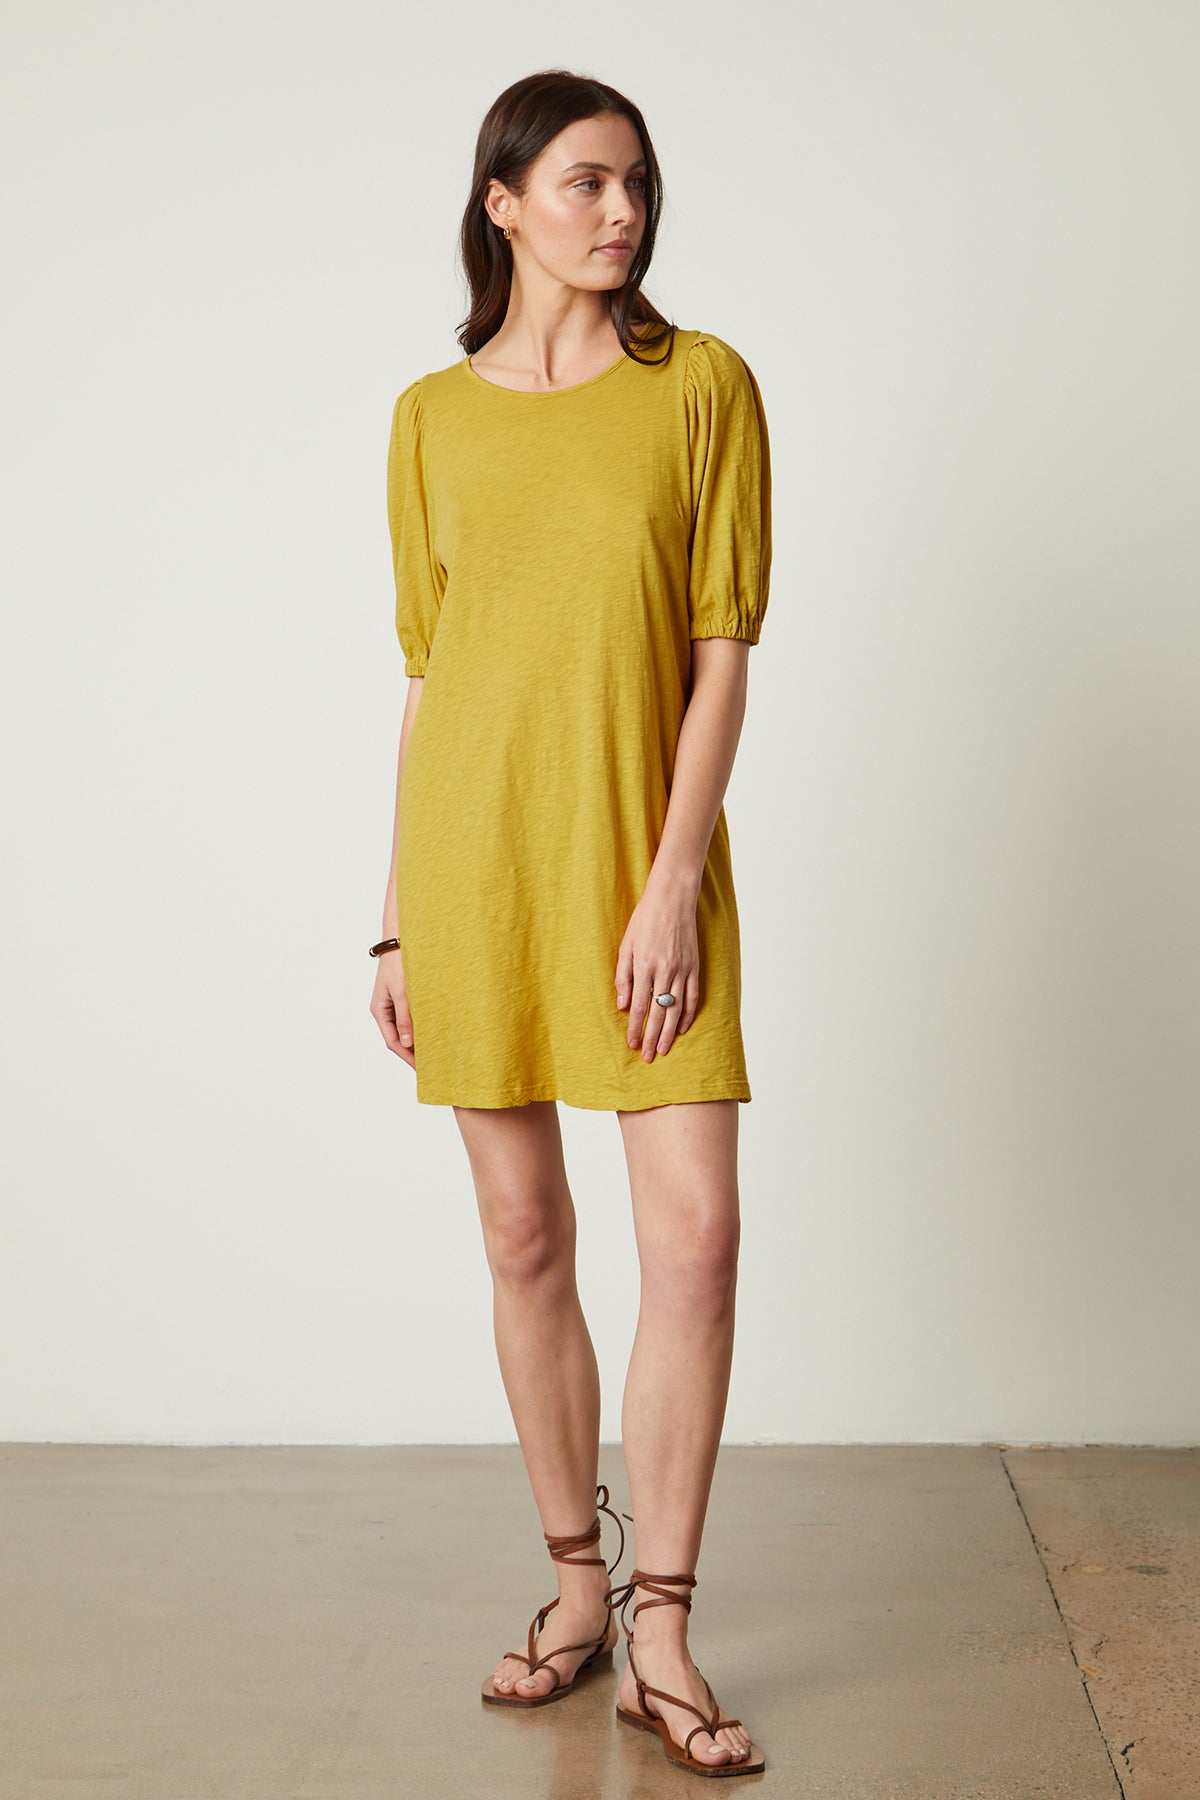 Meghan Dress in buttercup with puff sleeves full length front-26022634422465